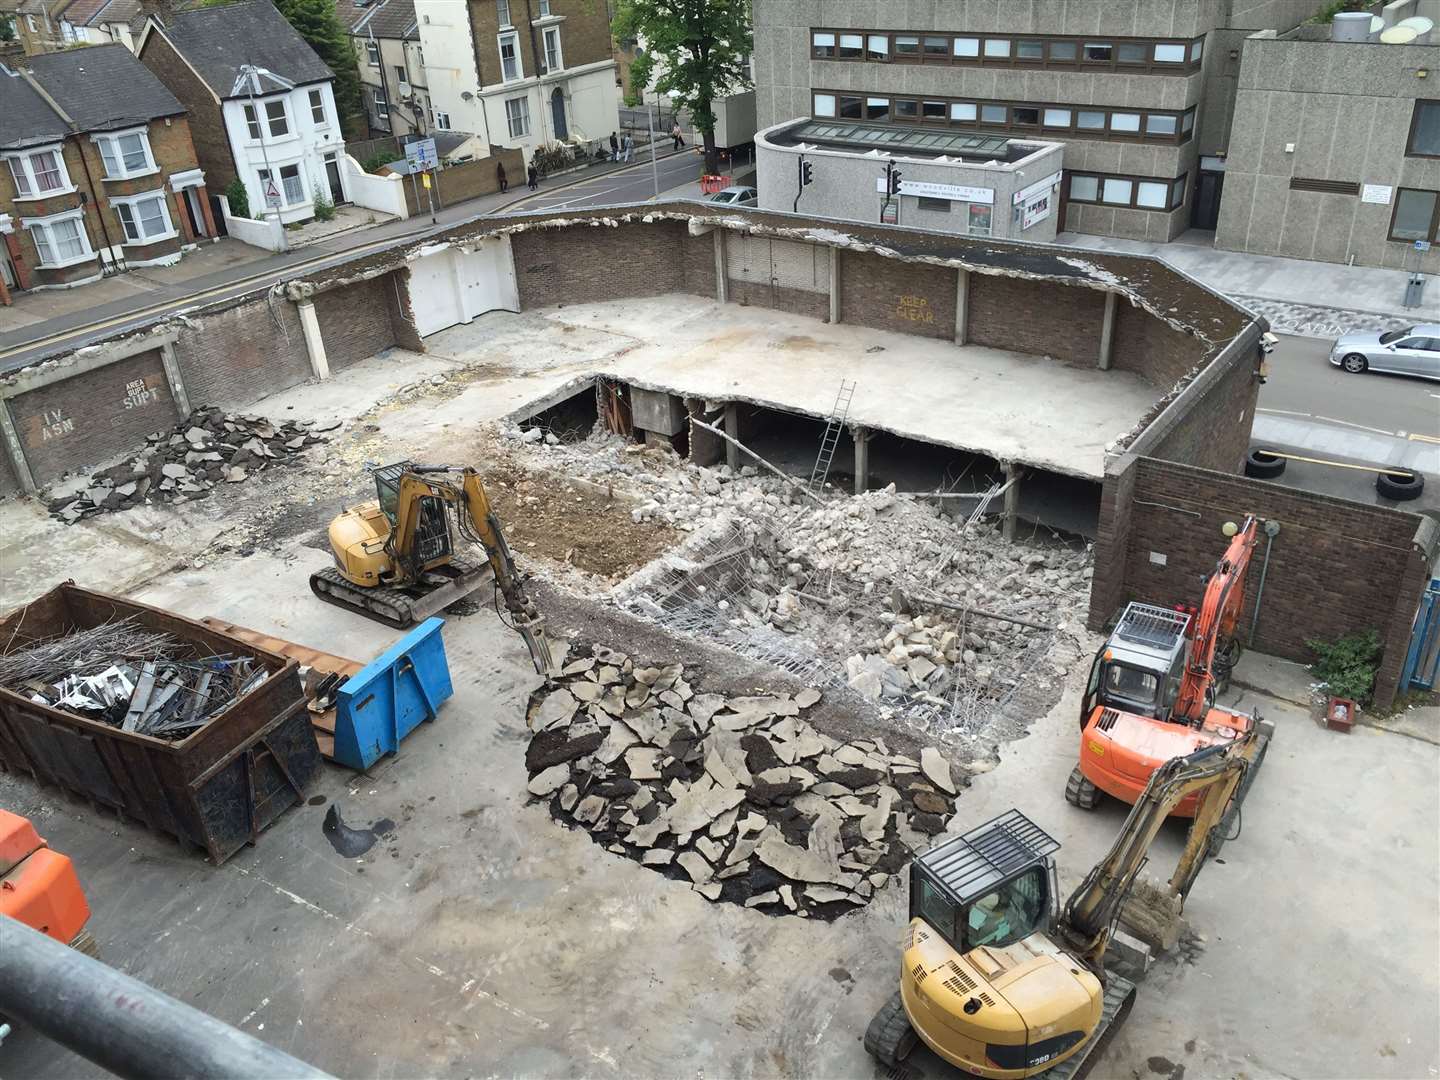 Gravesend's old police station has been demolished, with up to 99 flats/apartments set to replace it